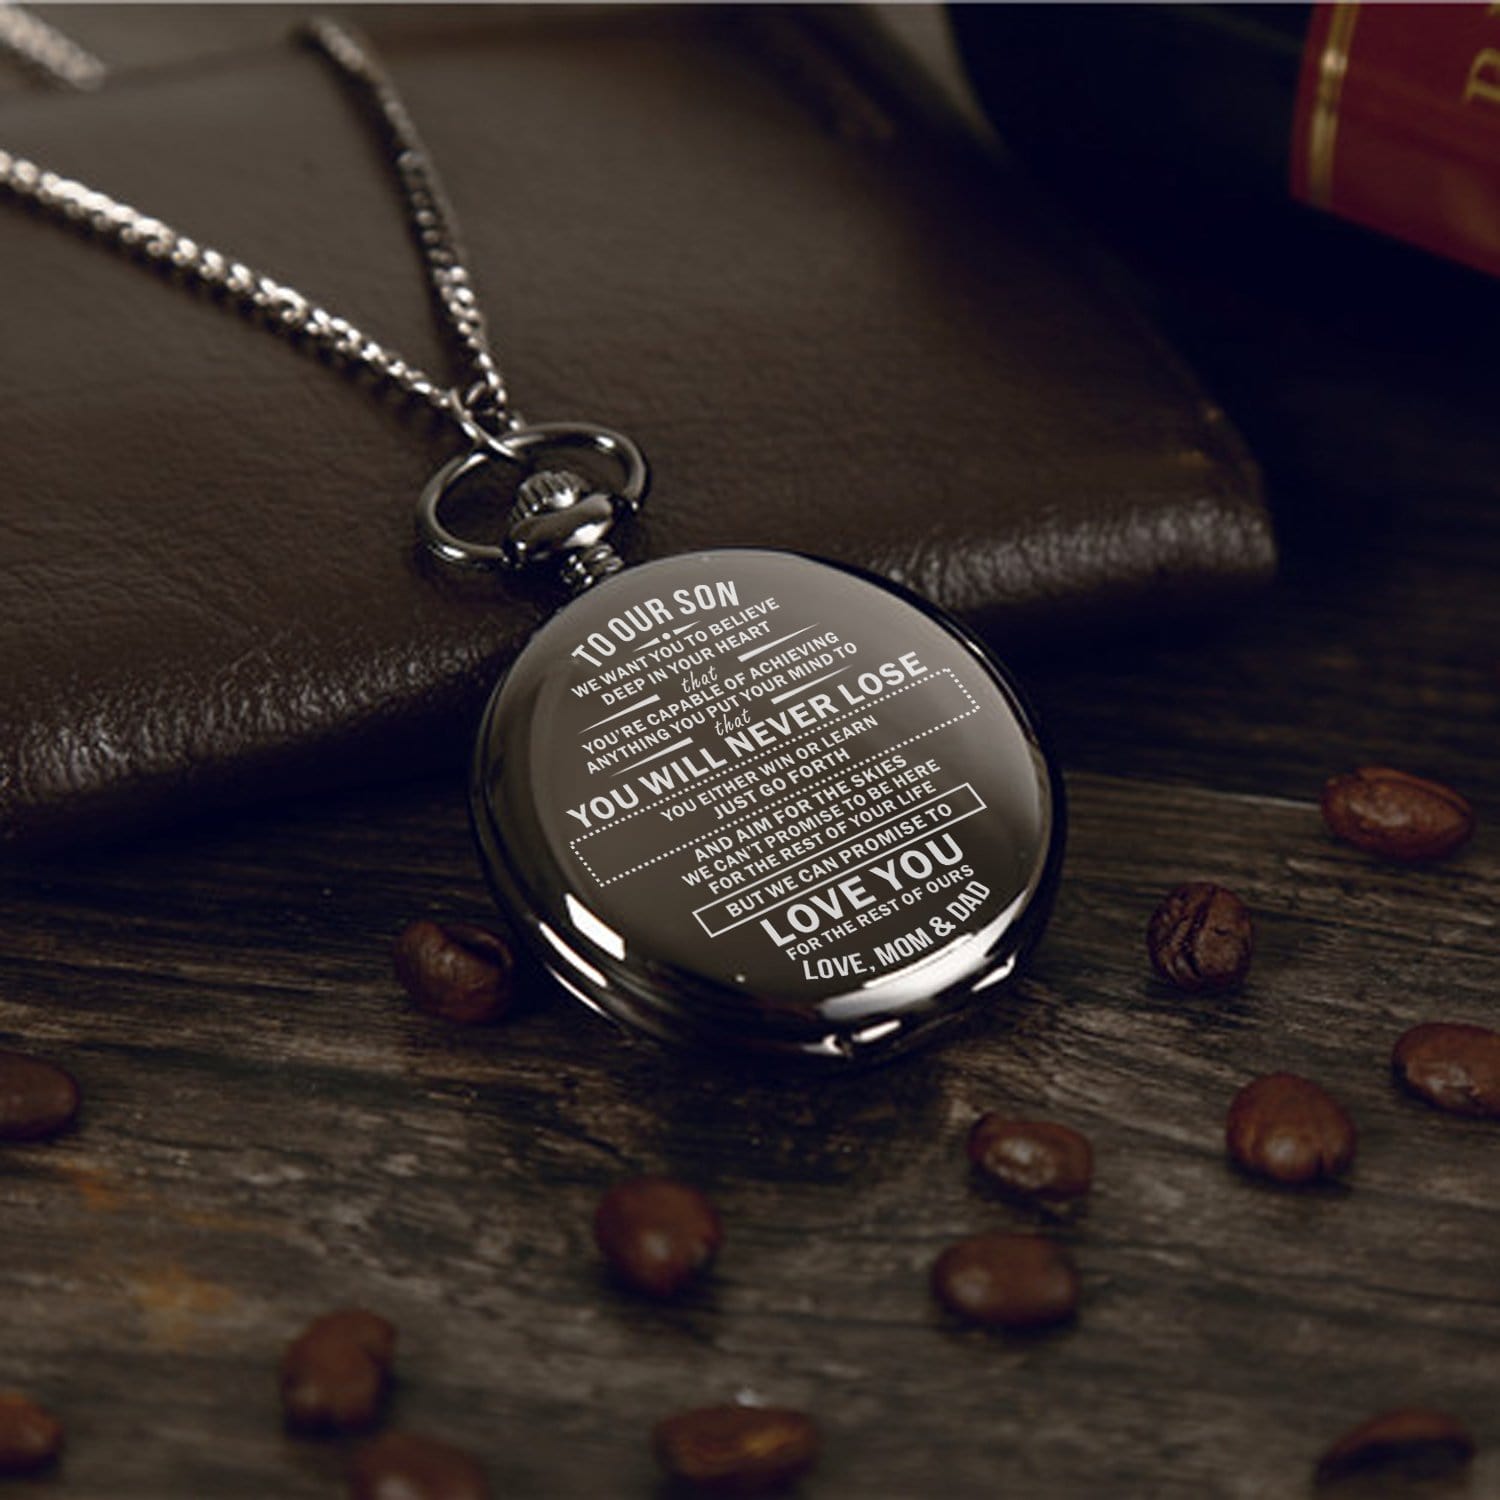 Pocket Watches To Our Son - You Will Never Lose Pocket Watch GiveMe-Gifts